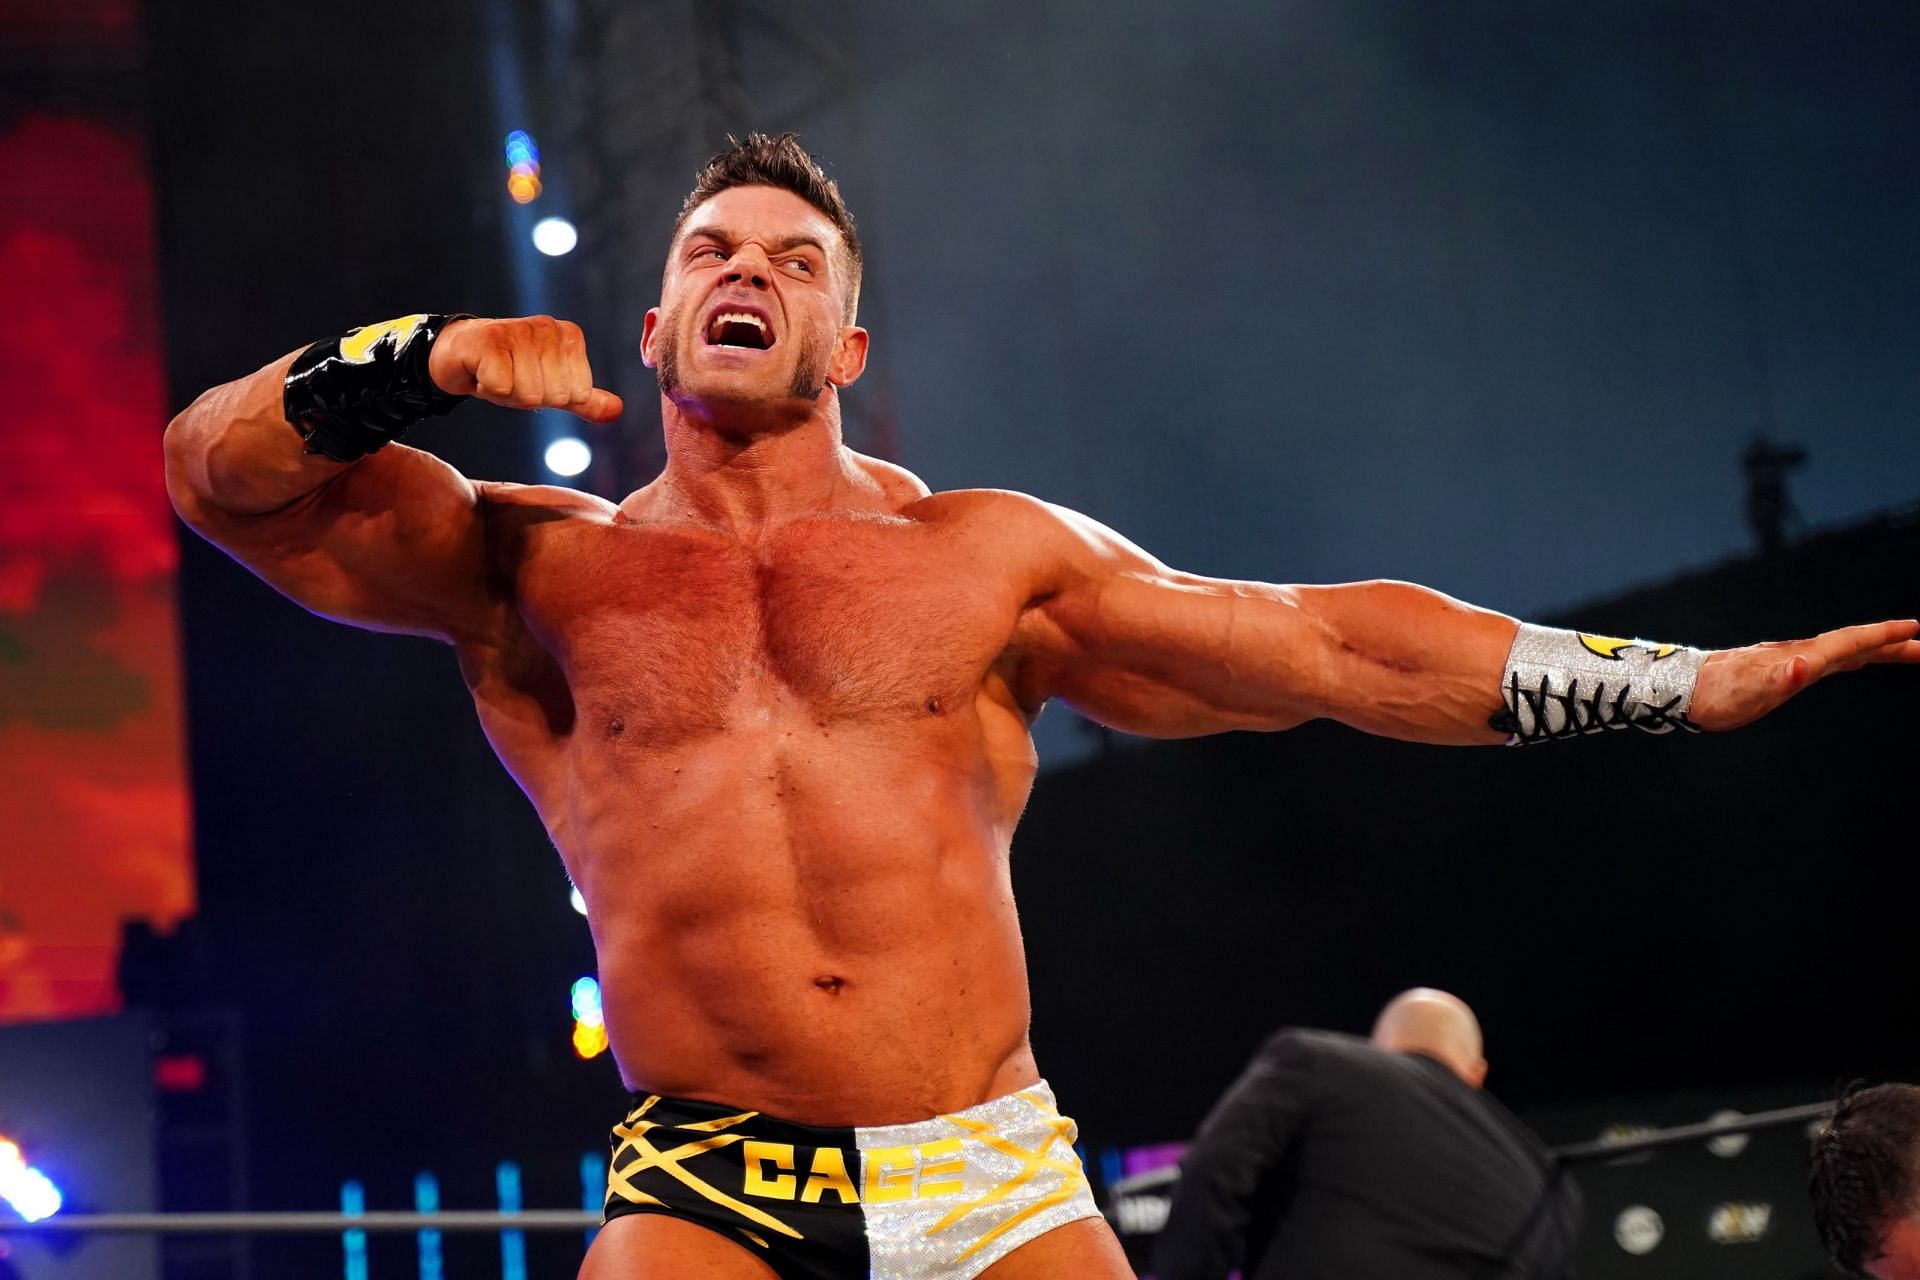 Brian Cage is set to face Will Ospreay in a title match